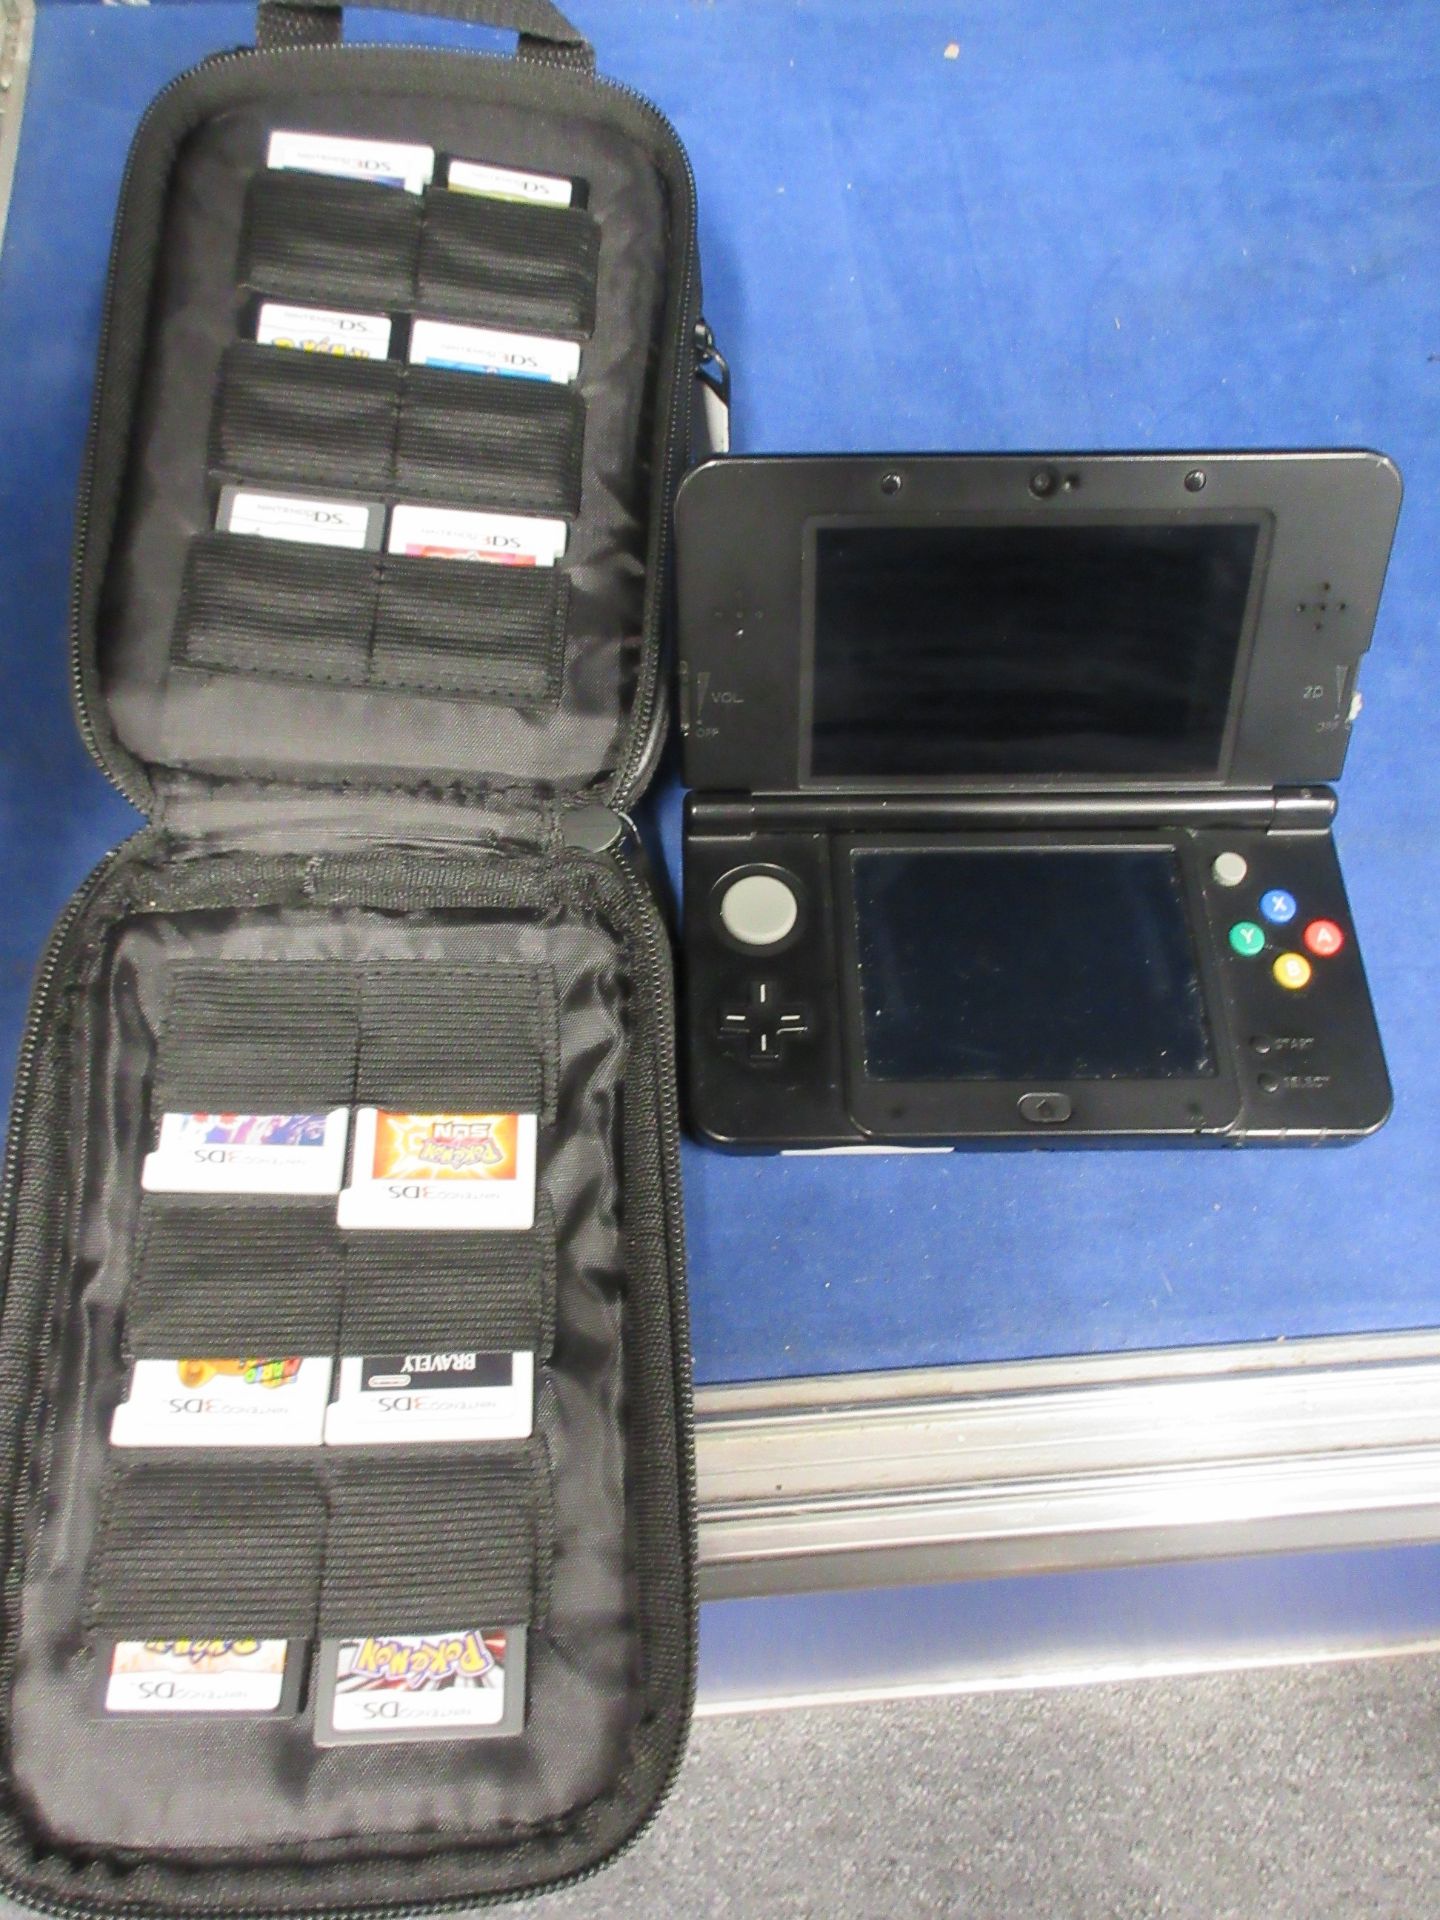 A pre-owned Nintendo 3DS Handheld Console ('New' version) in Black with thirteen assorted game cards